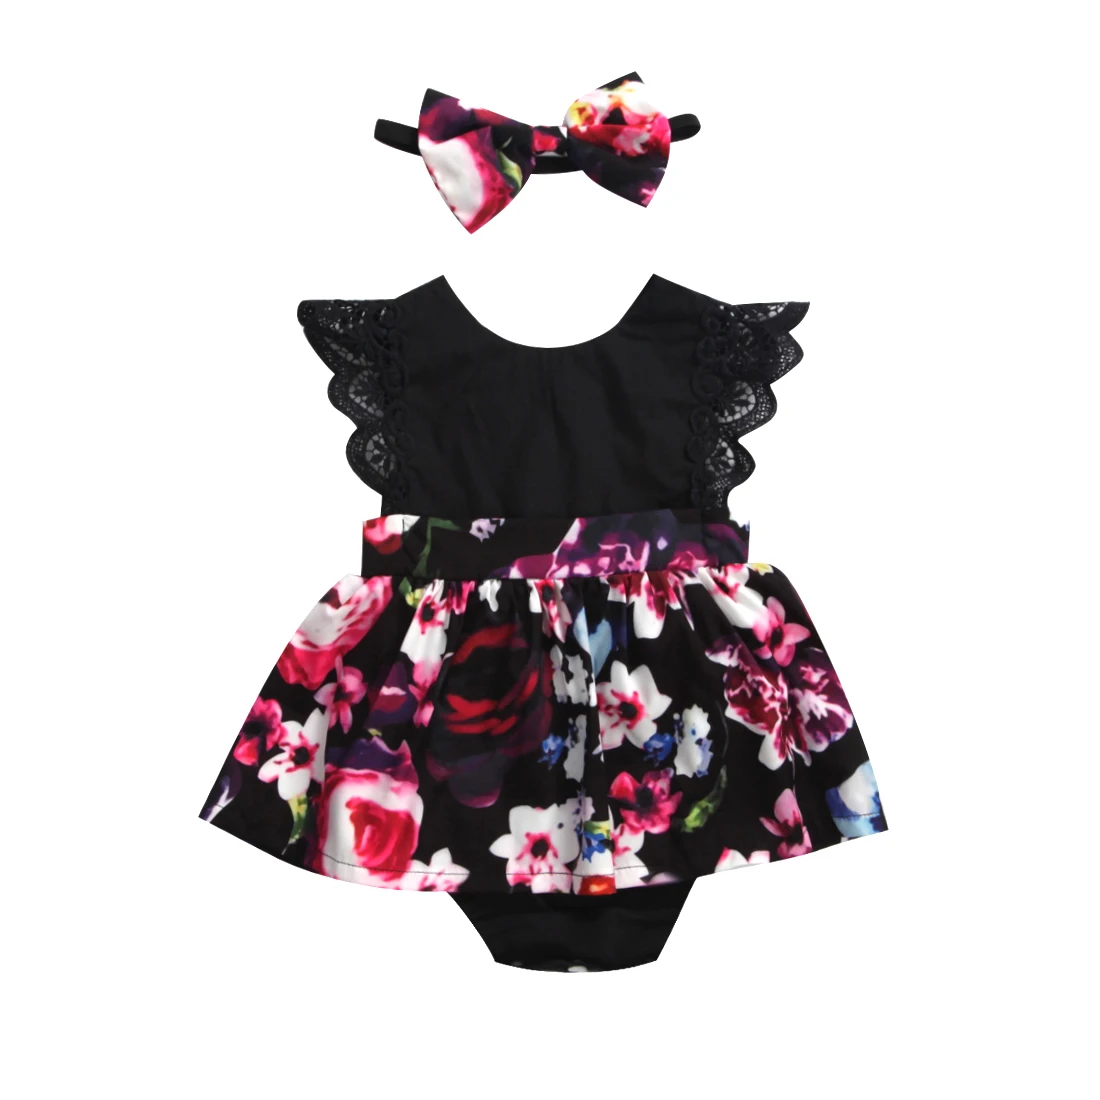 

2018 FOCUSNORM Newborn Baby Infant Girl Romper Tutu Dress Headband Floral Outfits Party Dress